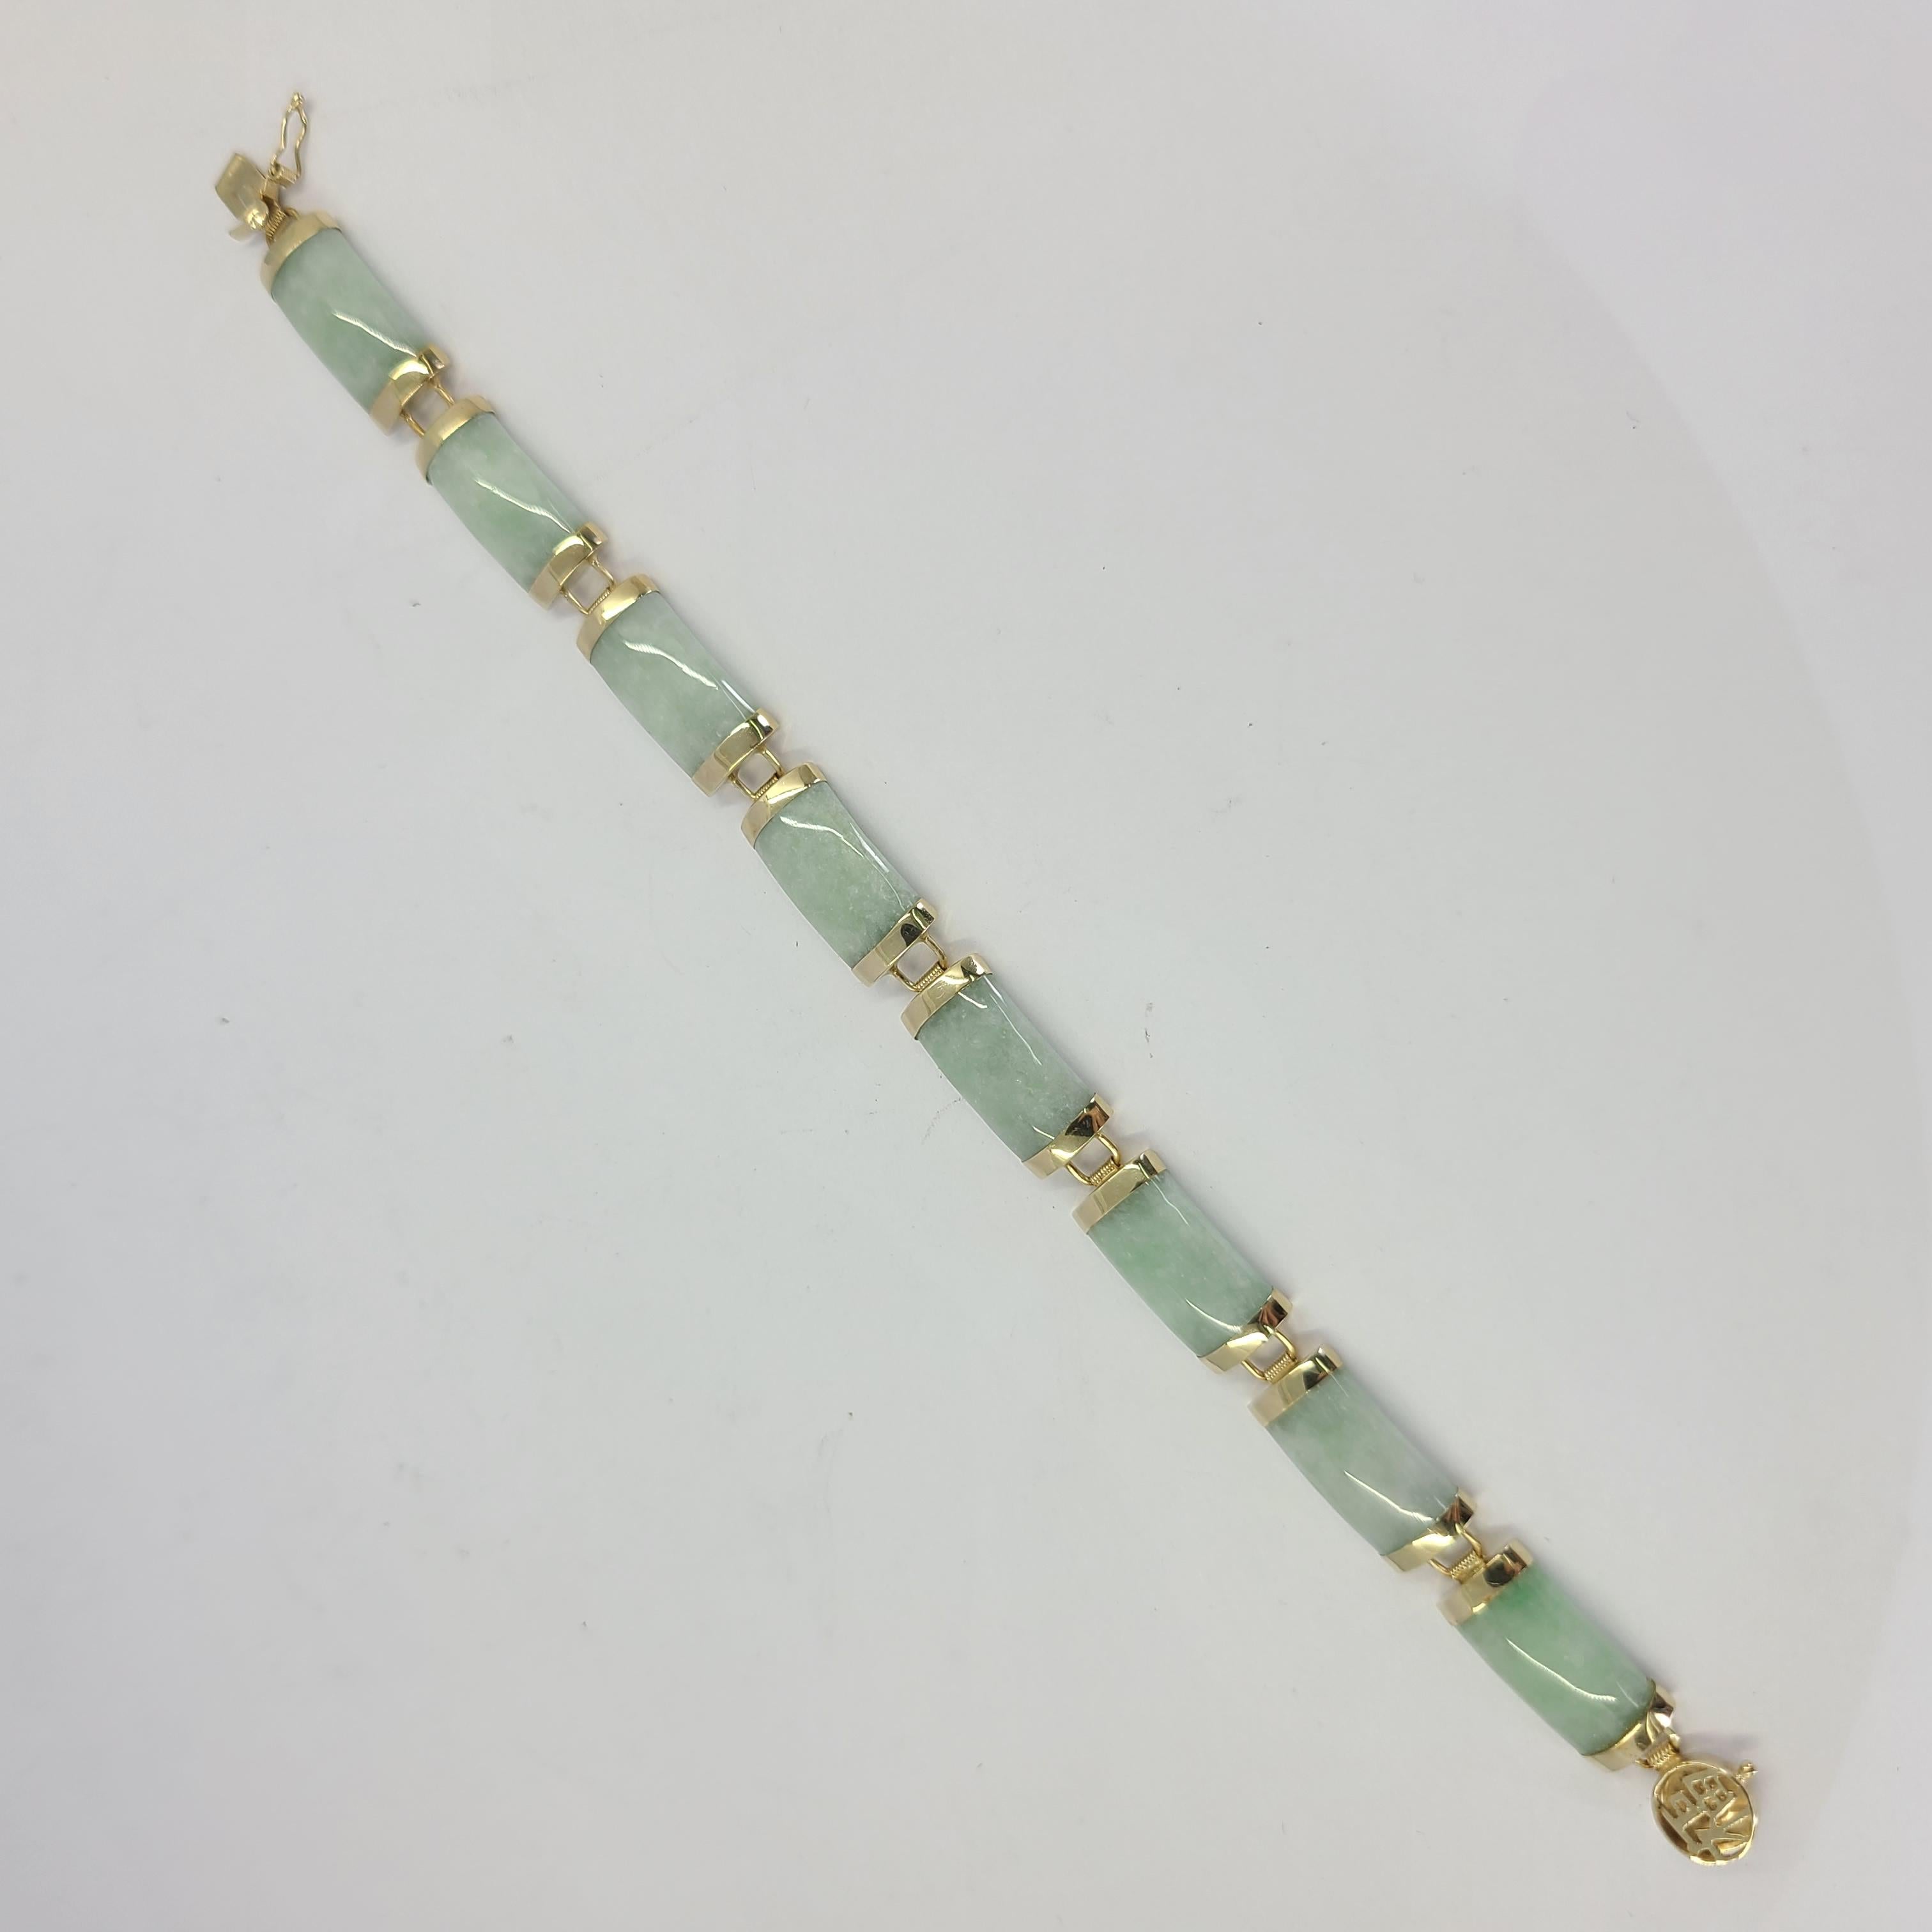 10 Karat Yellow Gold & Green Jade Bracelet Measuring 6 Inches Long. Asian Symbol On Clasp With Figure 8 Safety. Finished Weight Is 10.7 Grams. 